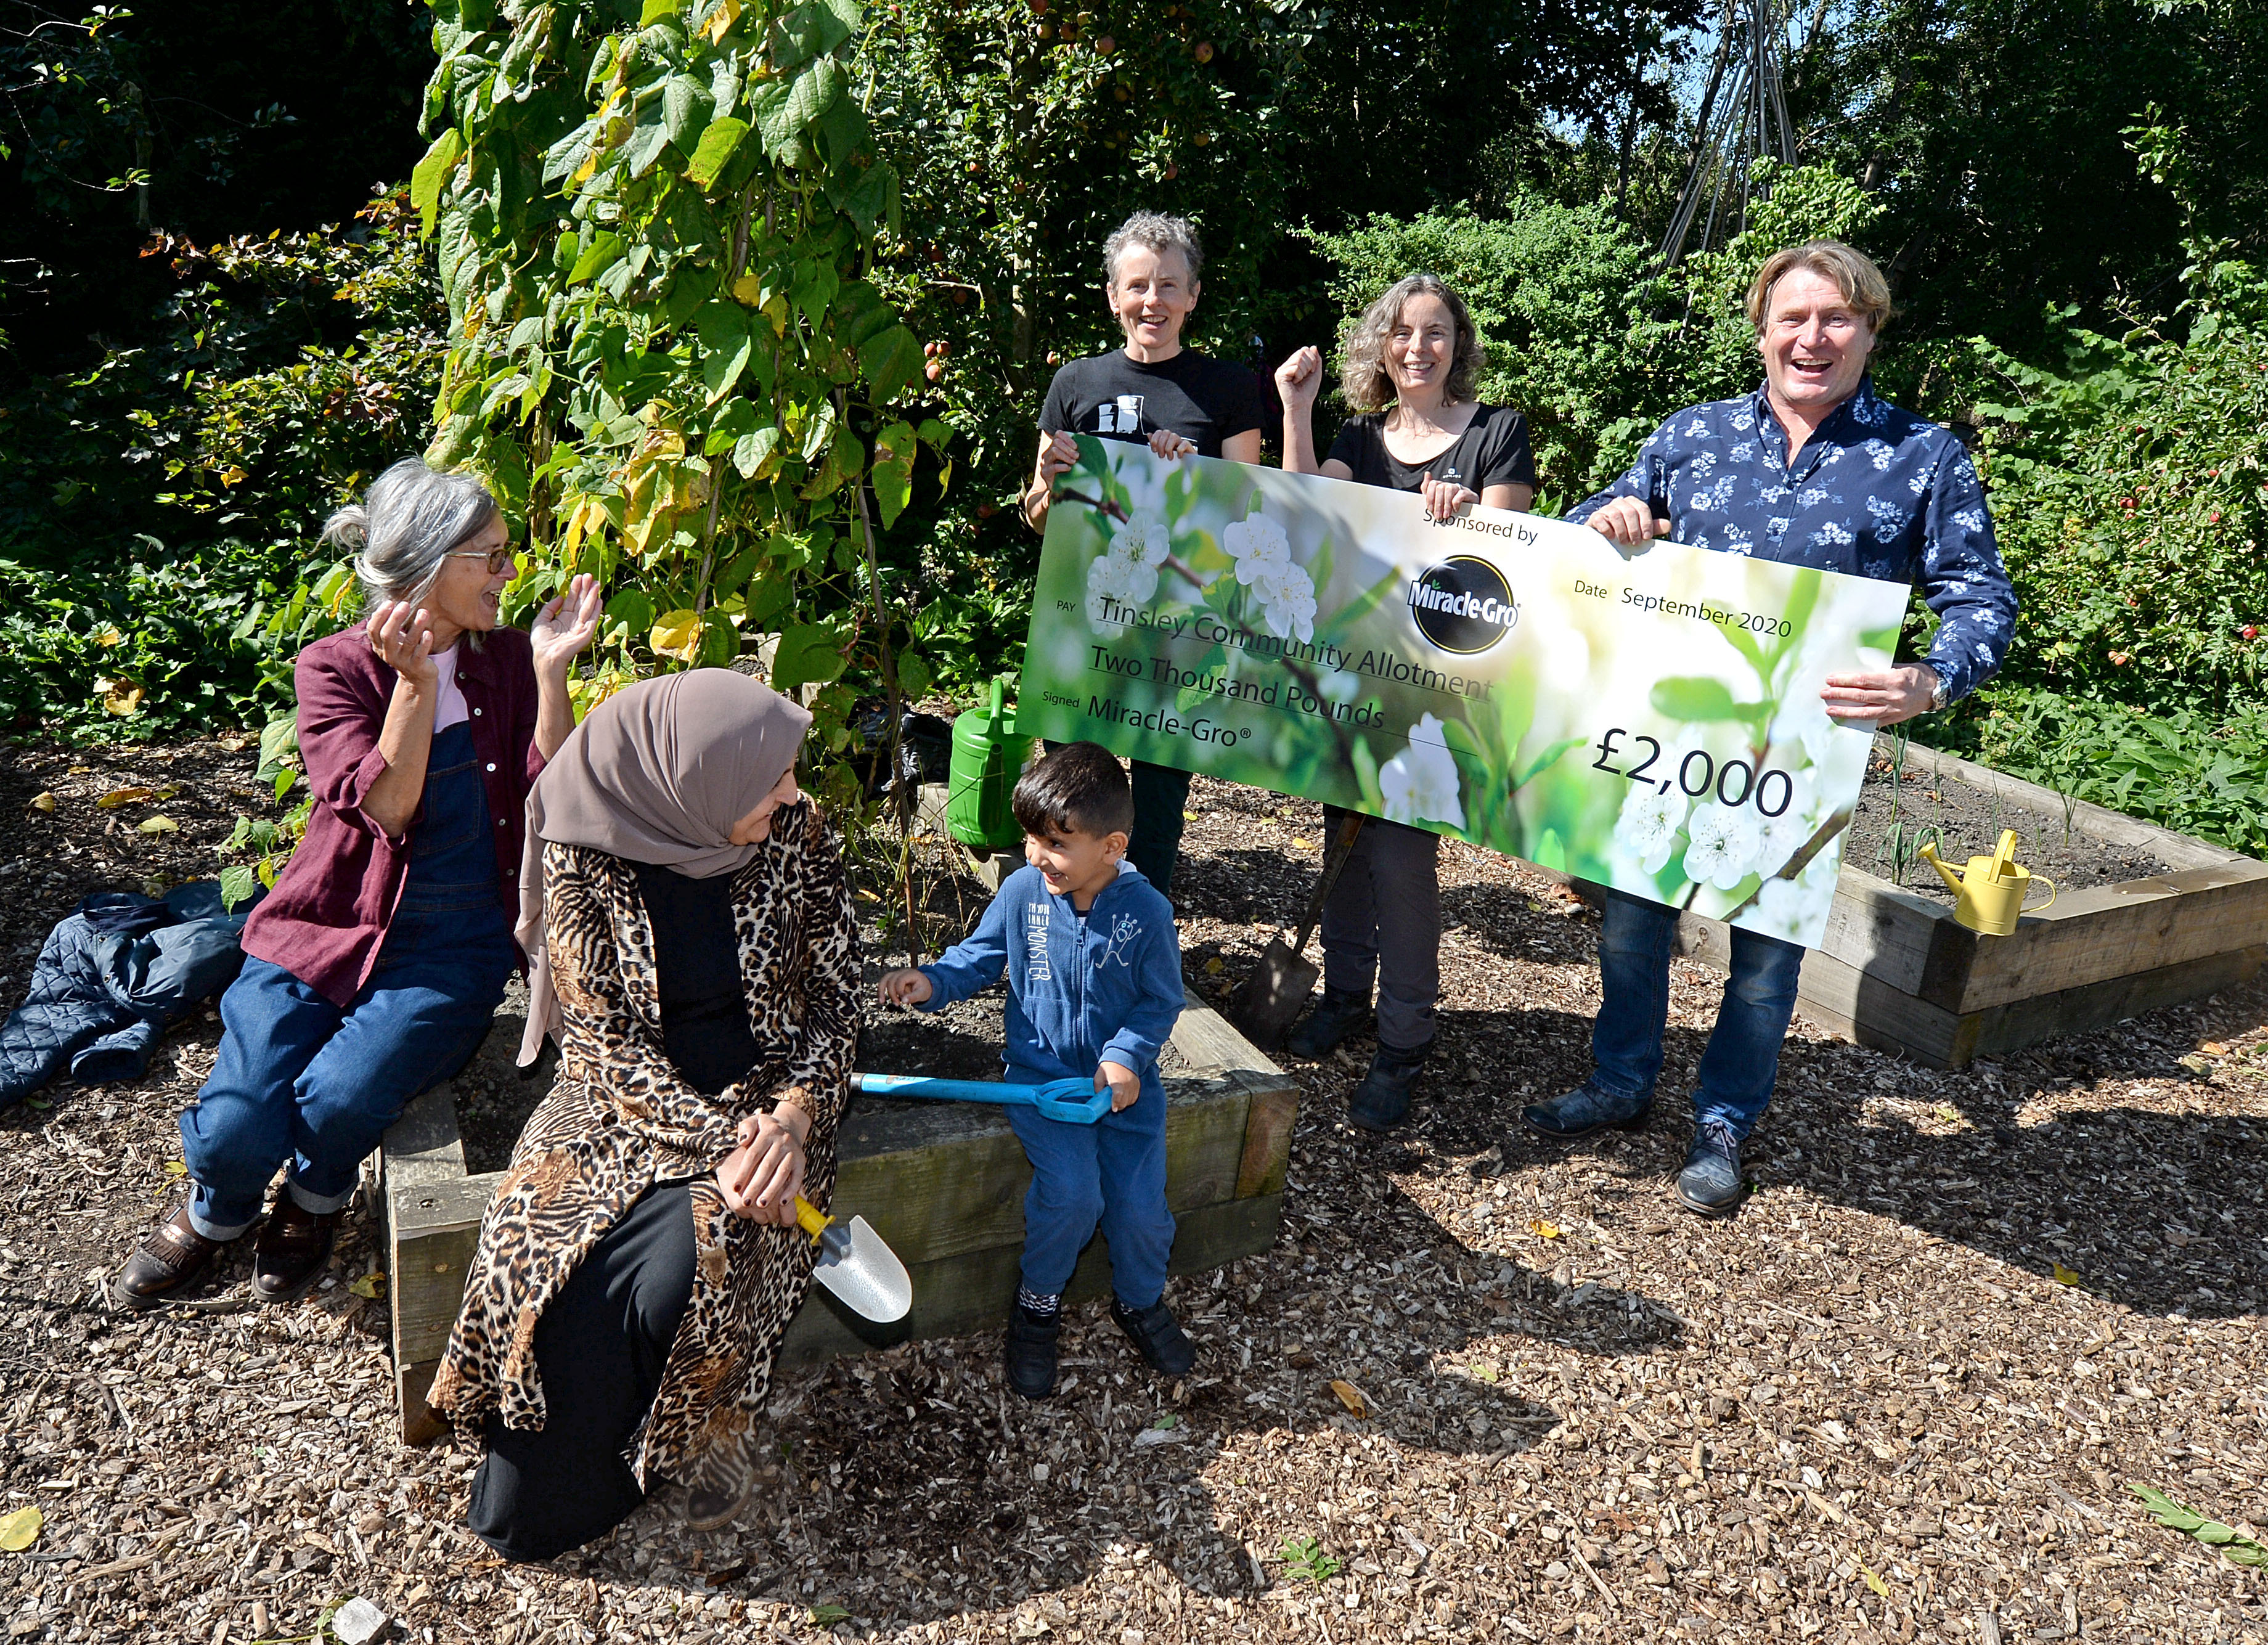 Gardener David Domoney with (L to R): Sheila Sutherland, Rezan Mohamed, Ravyer Osman, Jess Banham and Jacqui Dace at the Tinsley Community Allotment in Sheffield, South Yorkshire, which has won a 'Cultivation Street' award - a competition run by celebrity gardener, David Domoney.